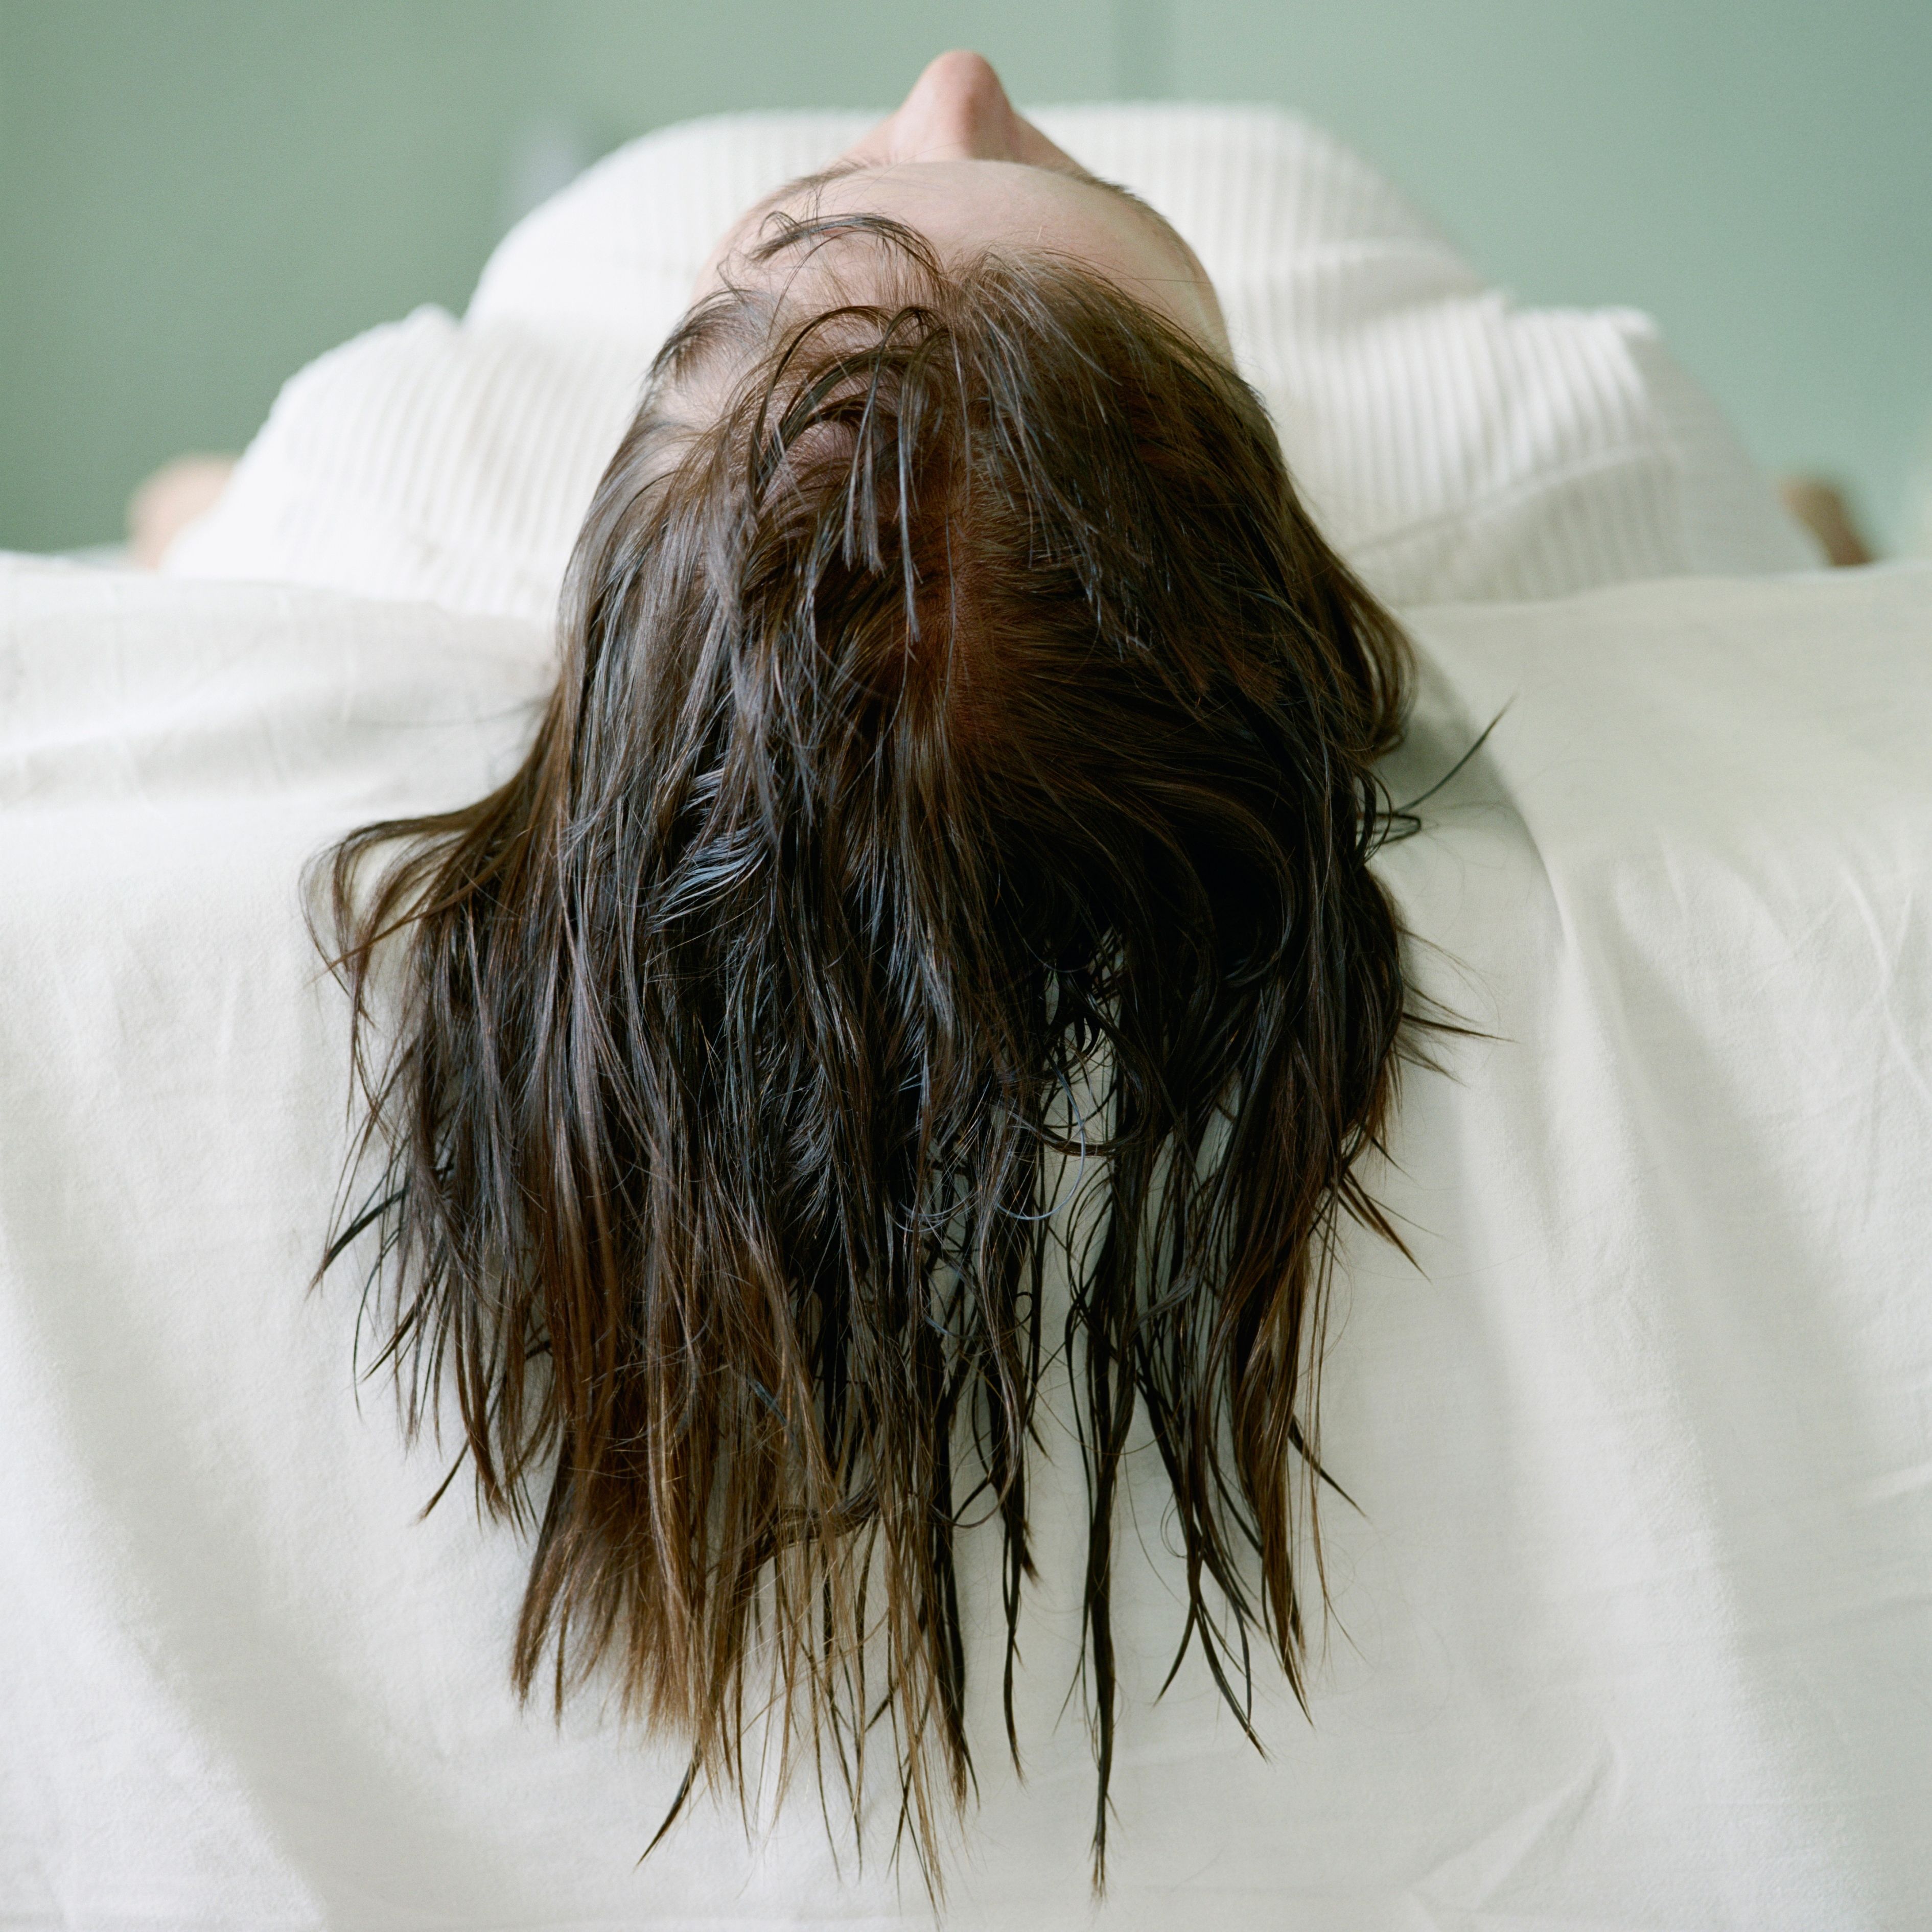 Sleeping with Wet Hair Side Effects What Happens When You Sleep With Wet  Hair